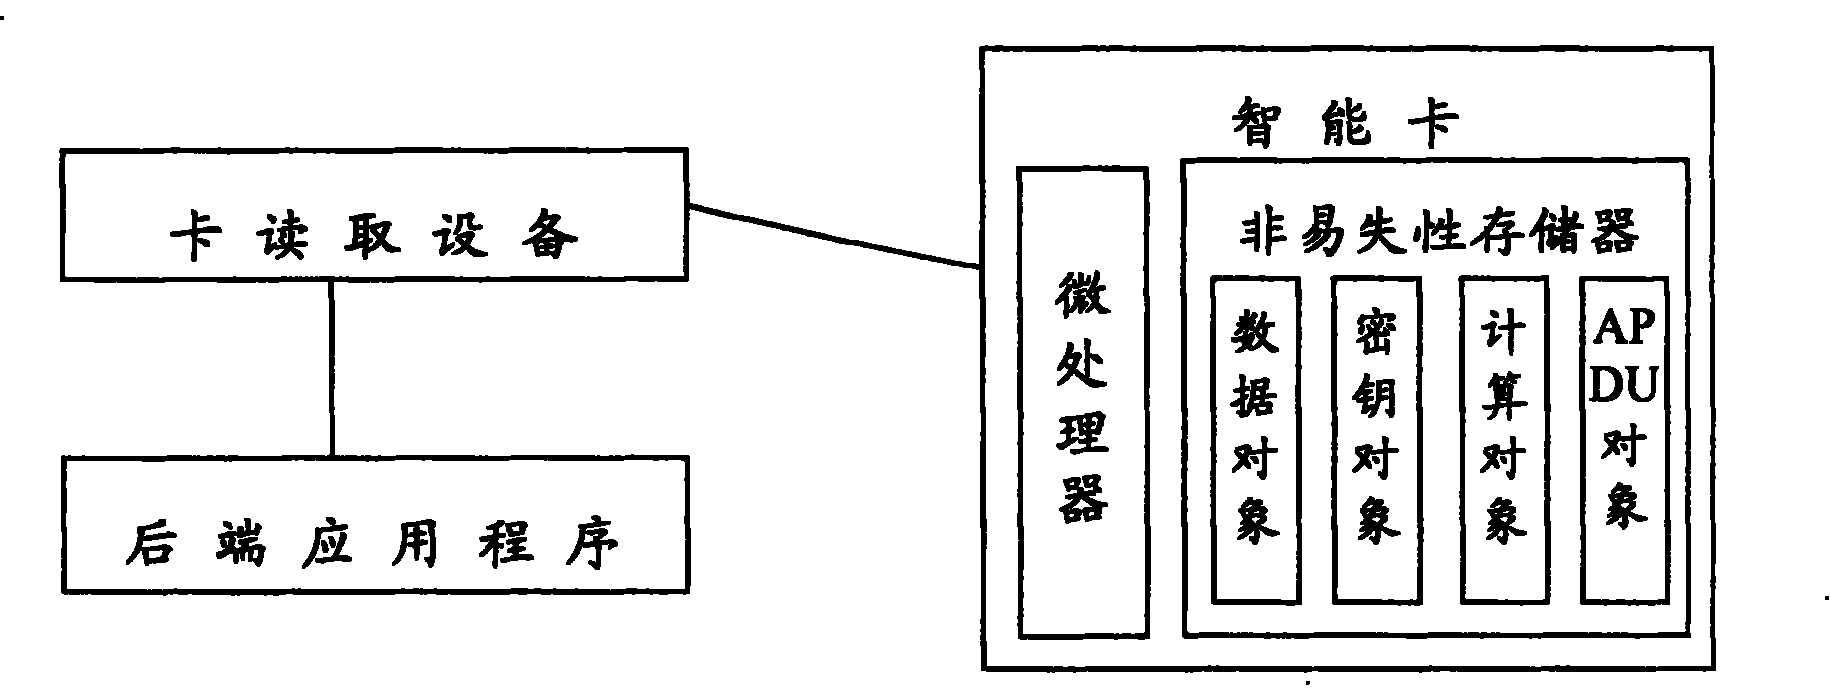 Smart card and method for creating application and insertion objects in smart card